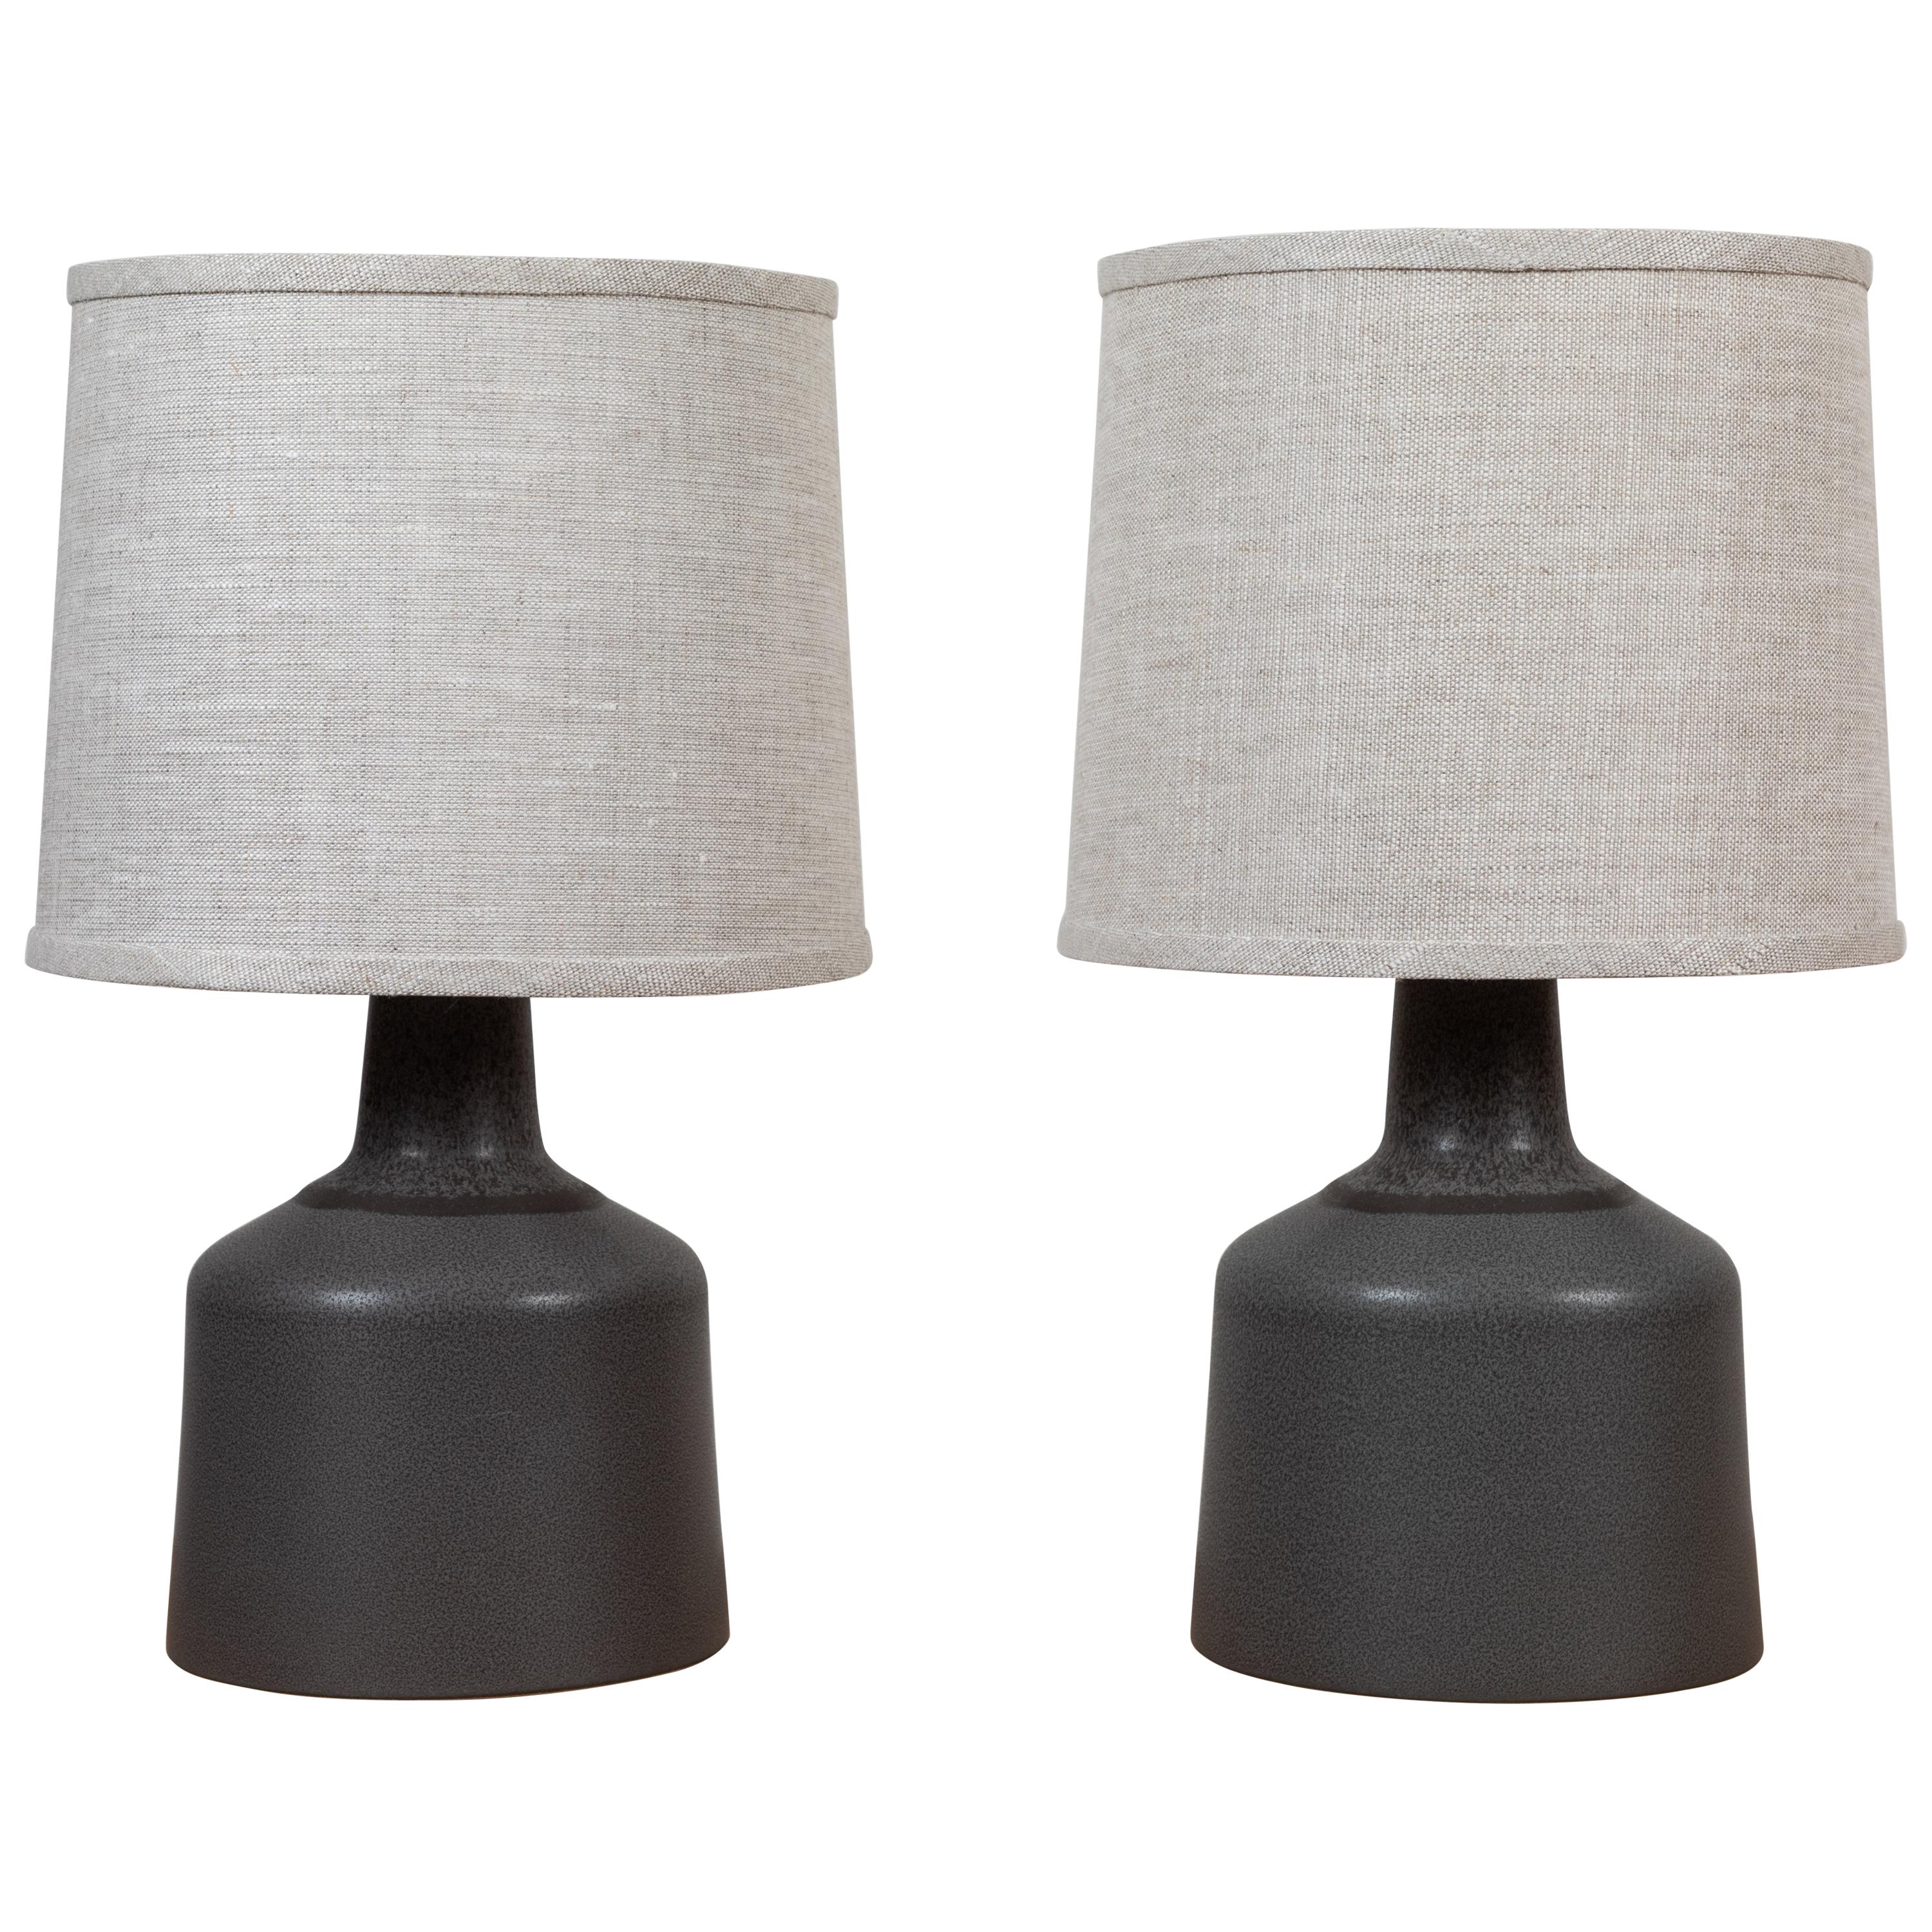 Pair of Martin Lamps by Stone and Sawyer for Lawson-Fenning